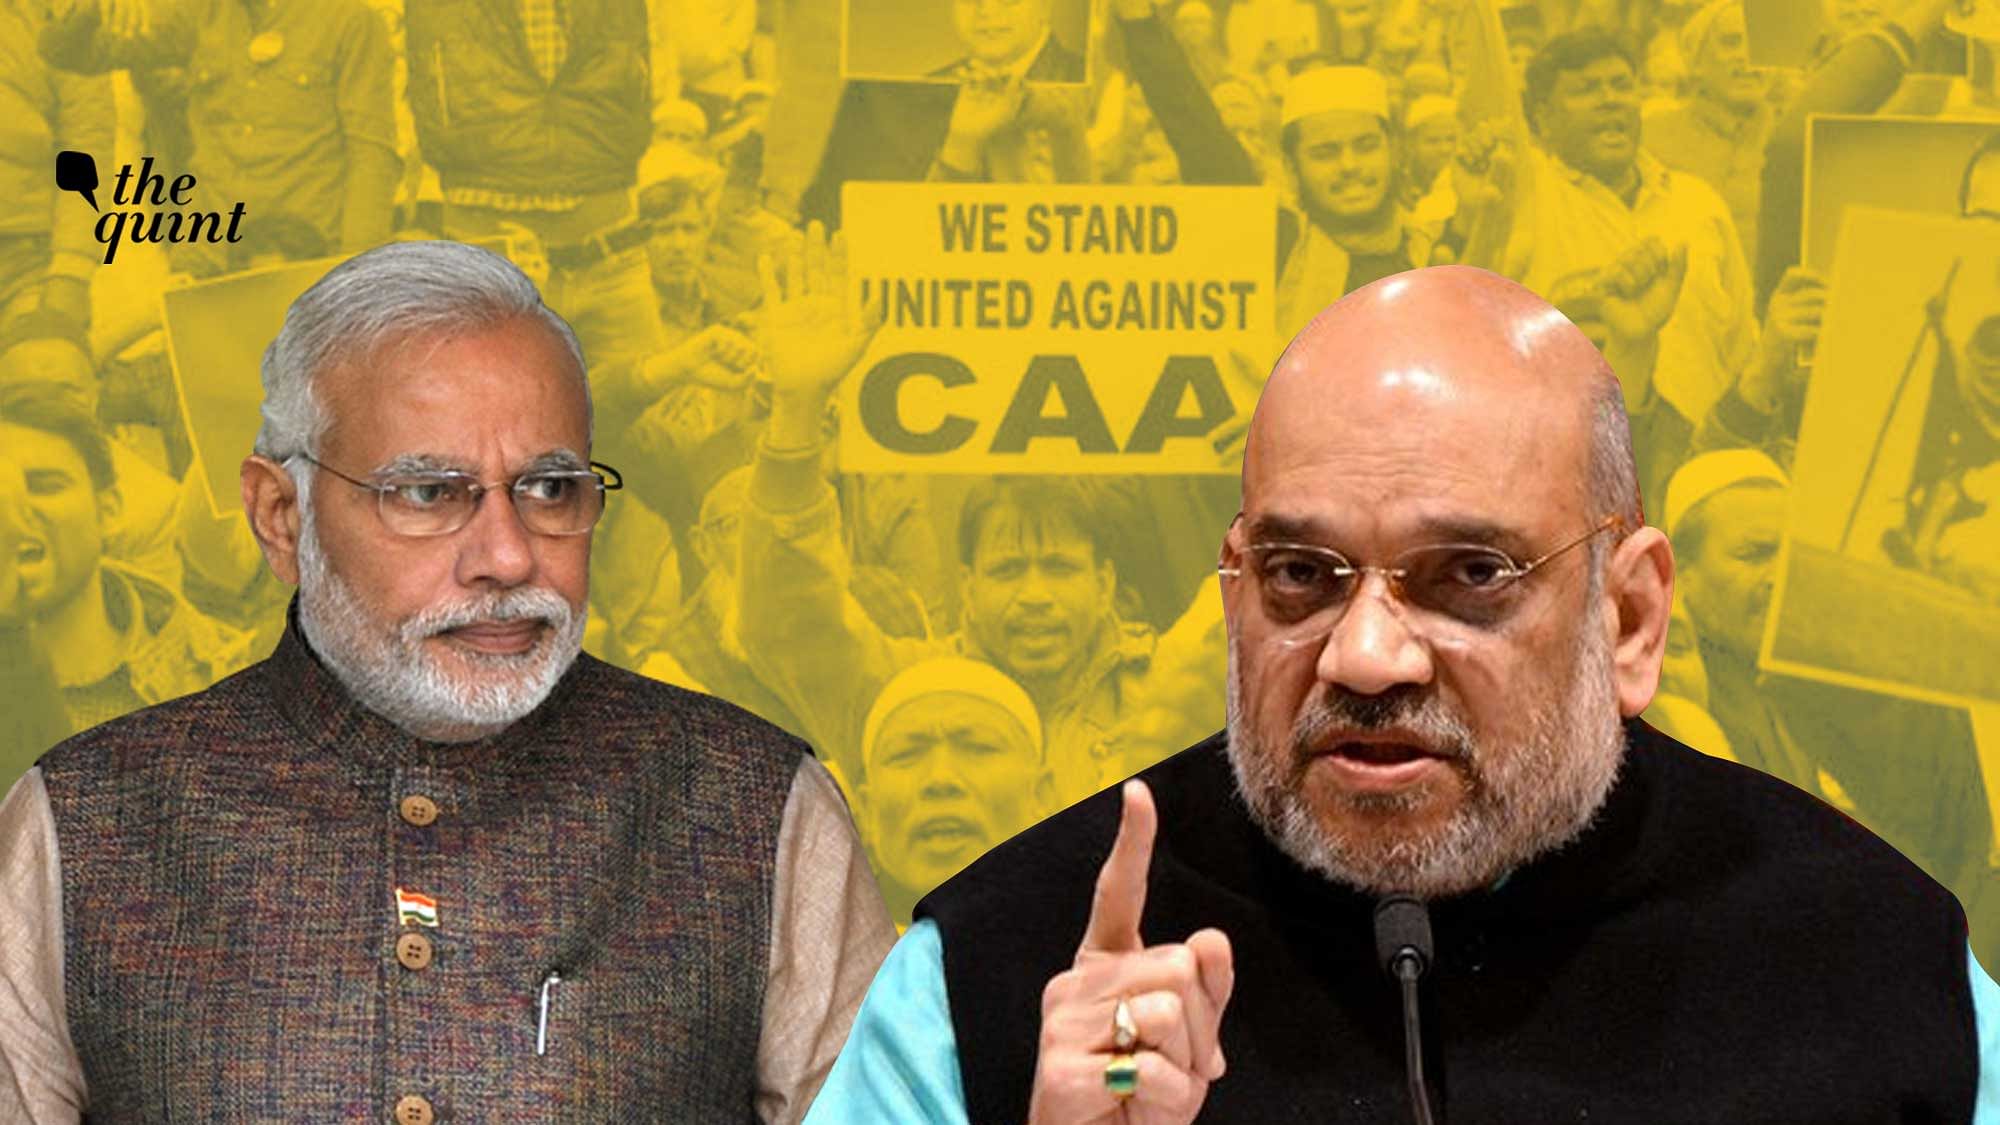 Union Home Minister Amit Shah said that he was ready to meet anyone who wants to discuss issues related to the CAA.